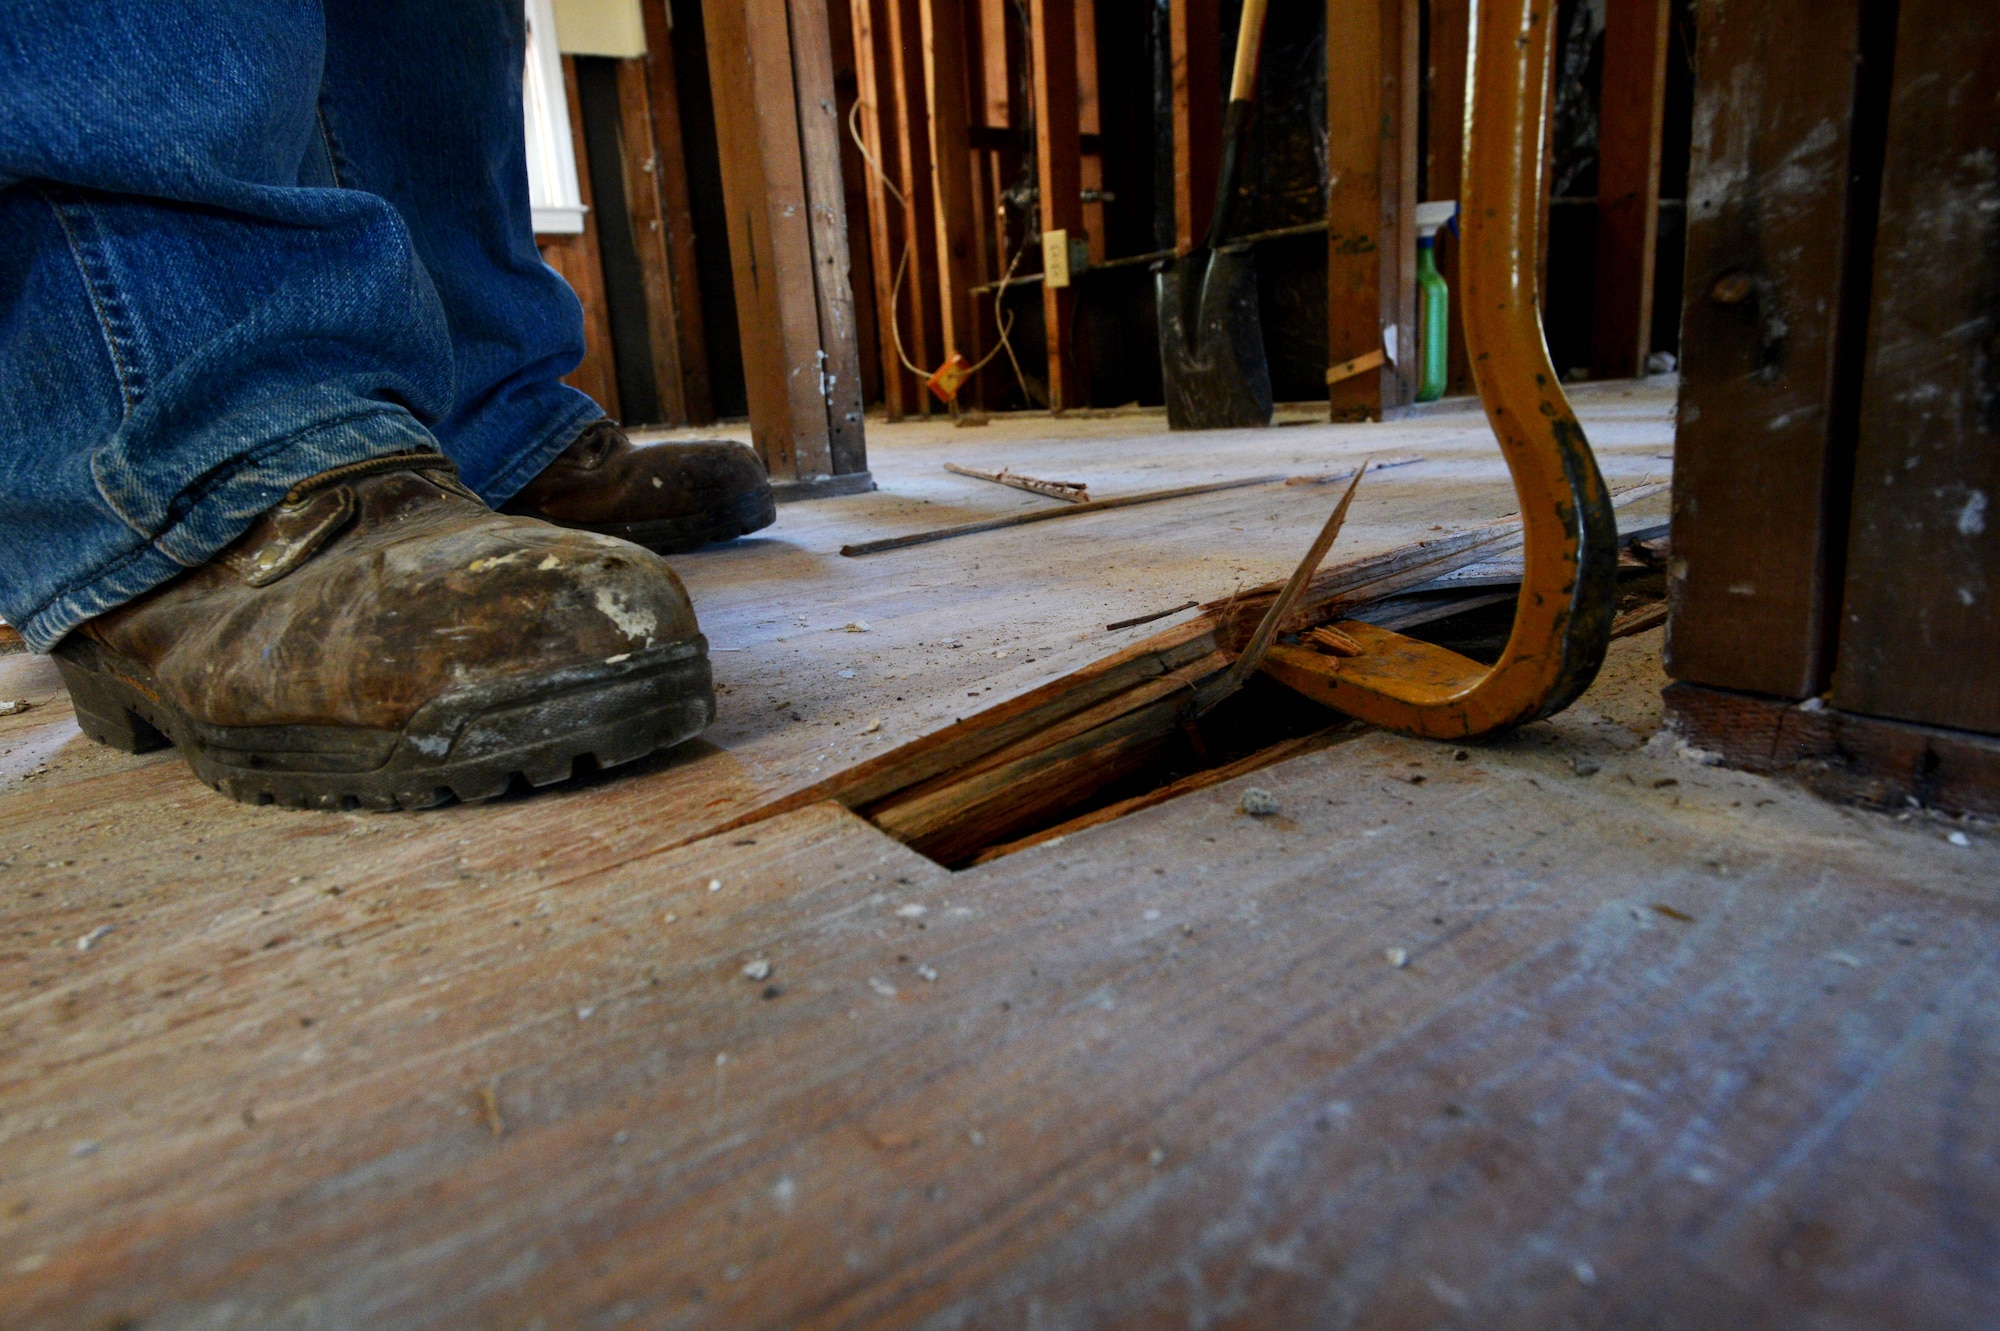 A disaster relief volunteer uses a crowbar to remove wood floors from a home affected by the flood in Sumter, S.C., Oct. 19, 2015. Thirty-two Shaw Air Force Base, S.C., Airmen totaled 320 hours in disaster relief efforts within the Sumter community during the three day shift. (U.S. Air Force photo by Senior Airman Diana M. Cossaboom/Released)